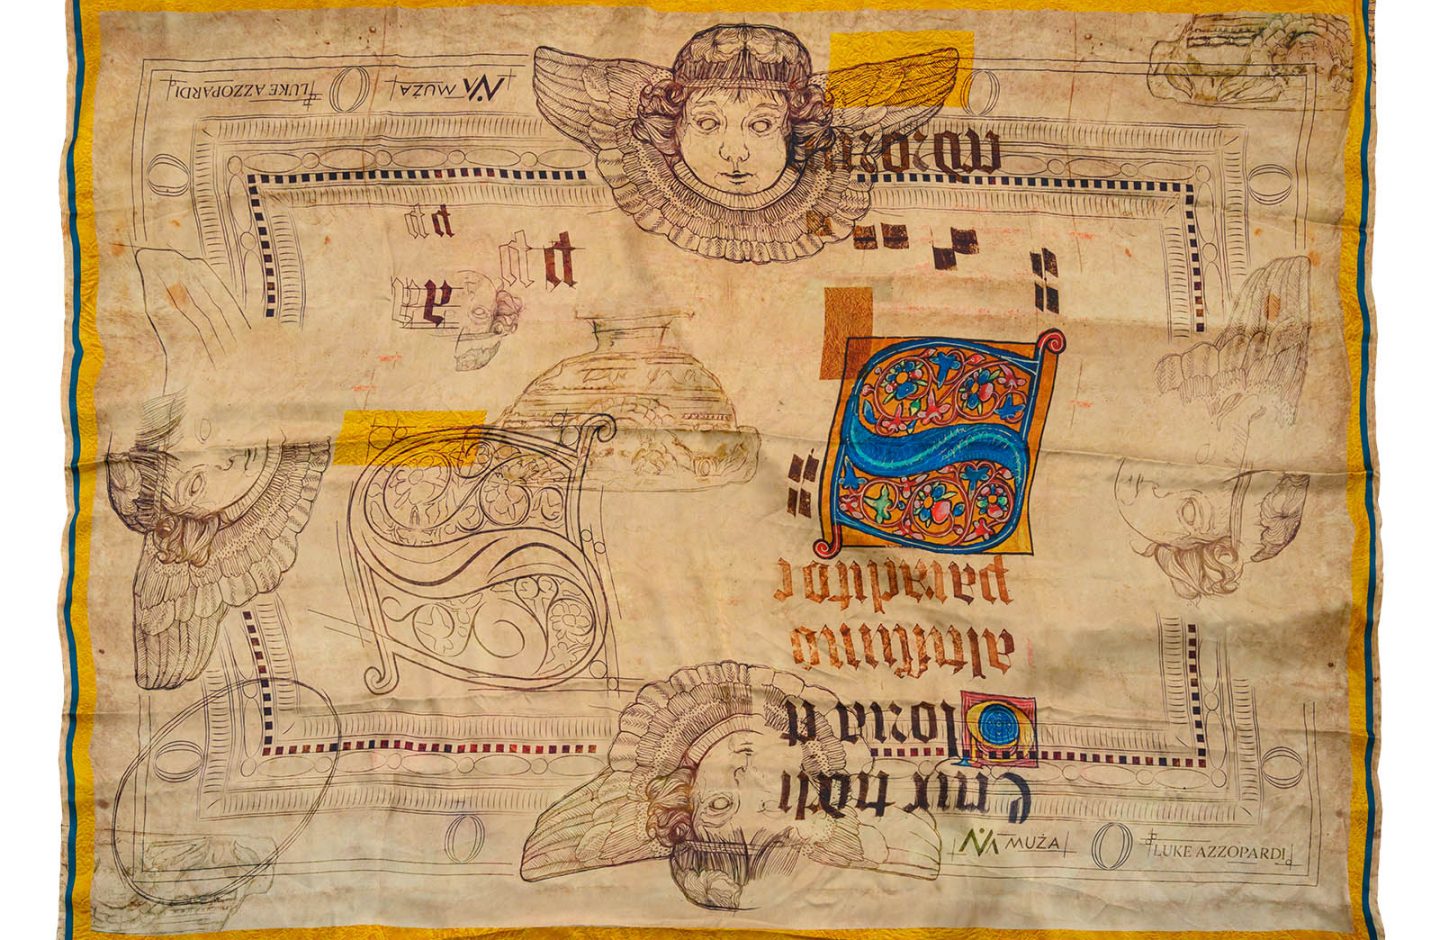 Scarf: ‘Fragment from a Choral Book showing a historiated initial’ and ‘Holy Water Stoup’